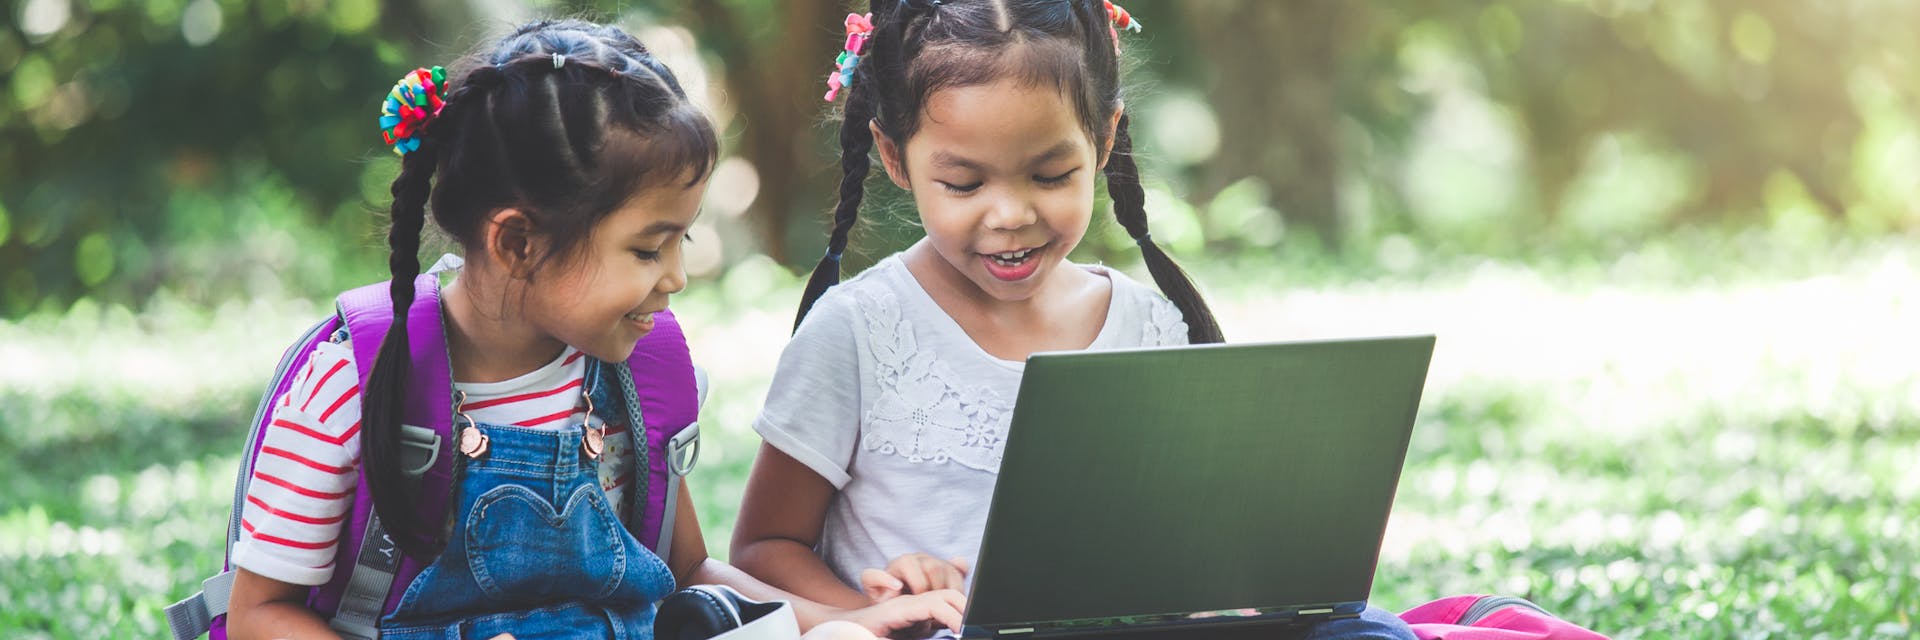 Two young girls sit outside and play Prodigy on a laptop to prevent summer learning loss.